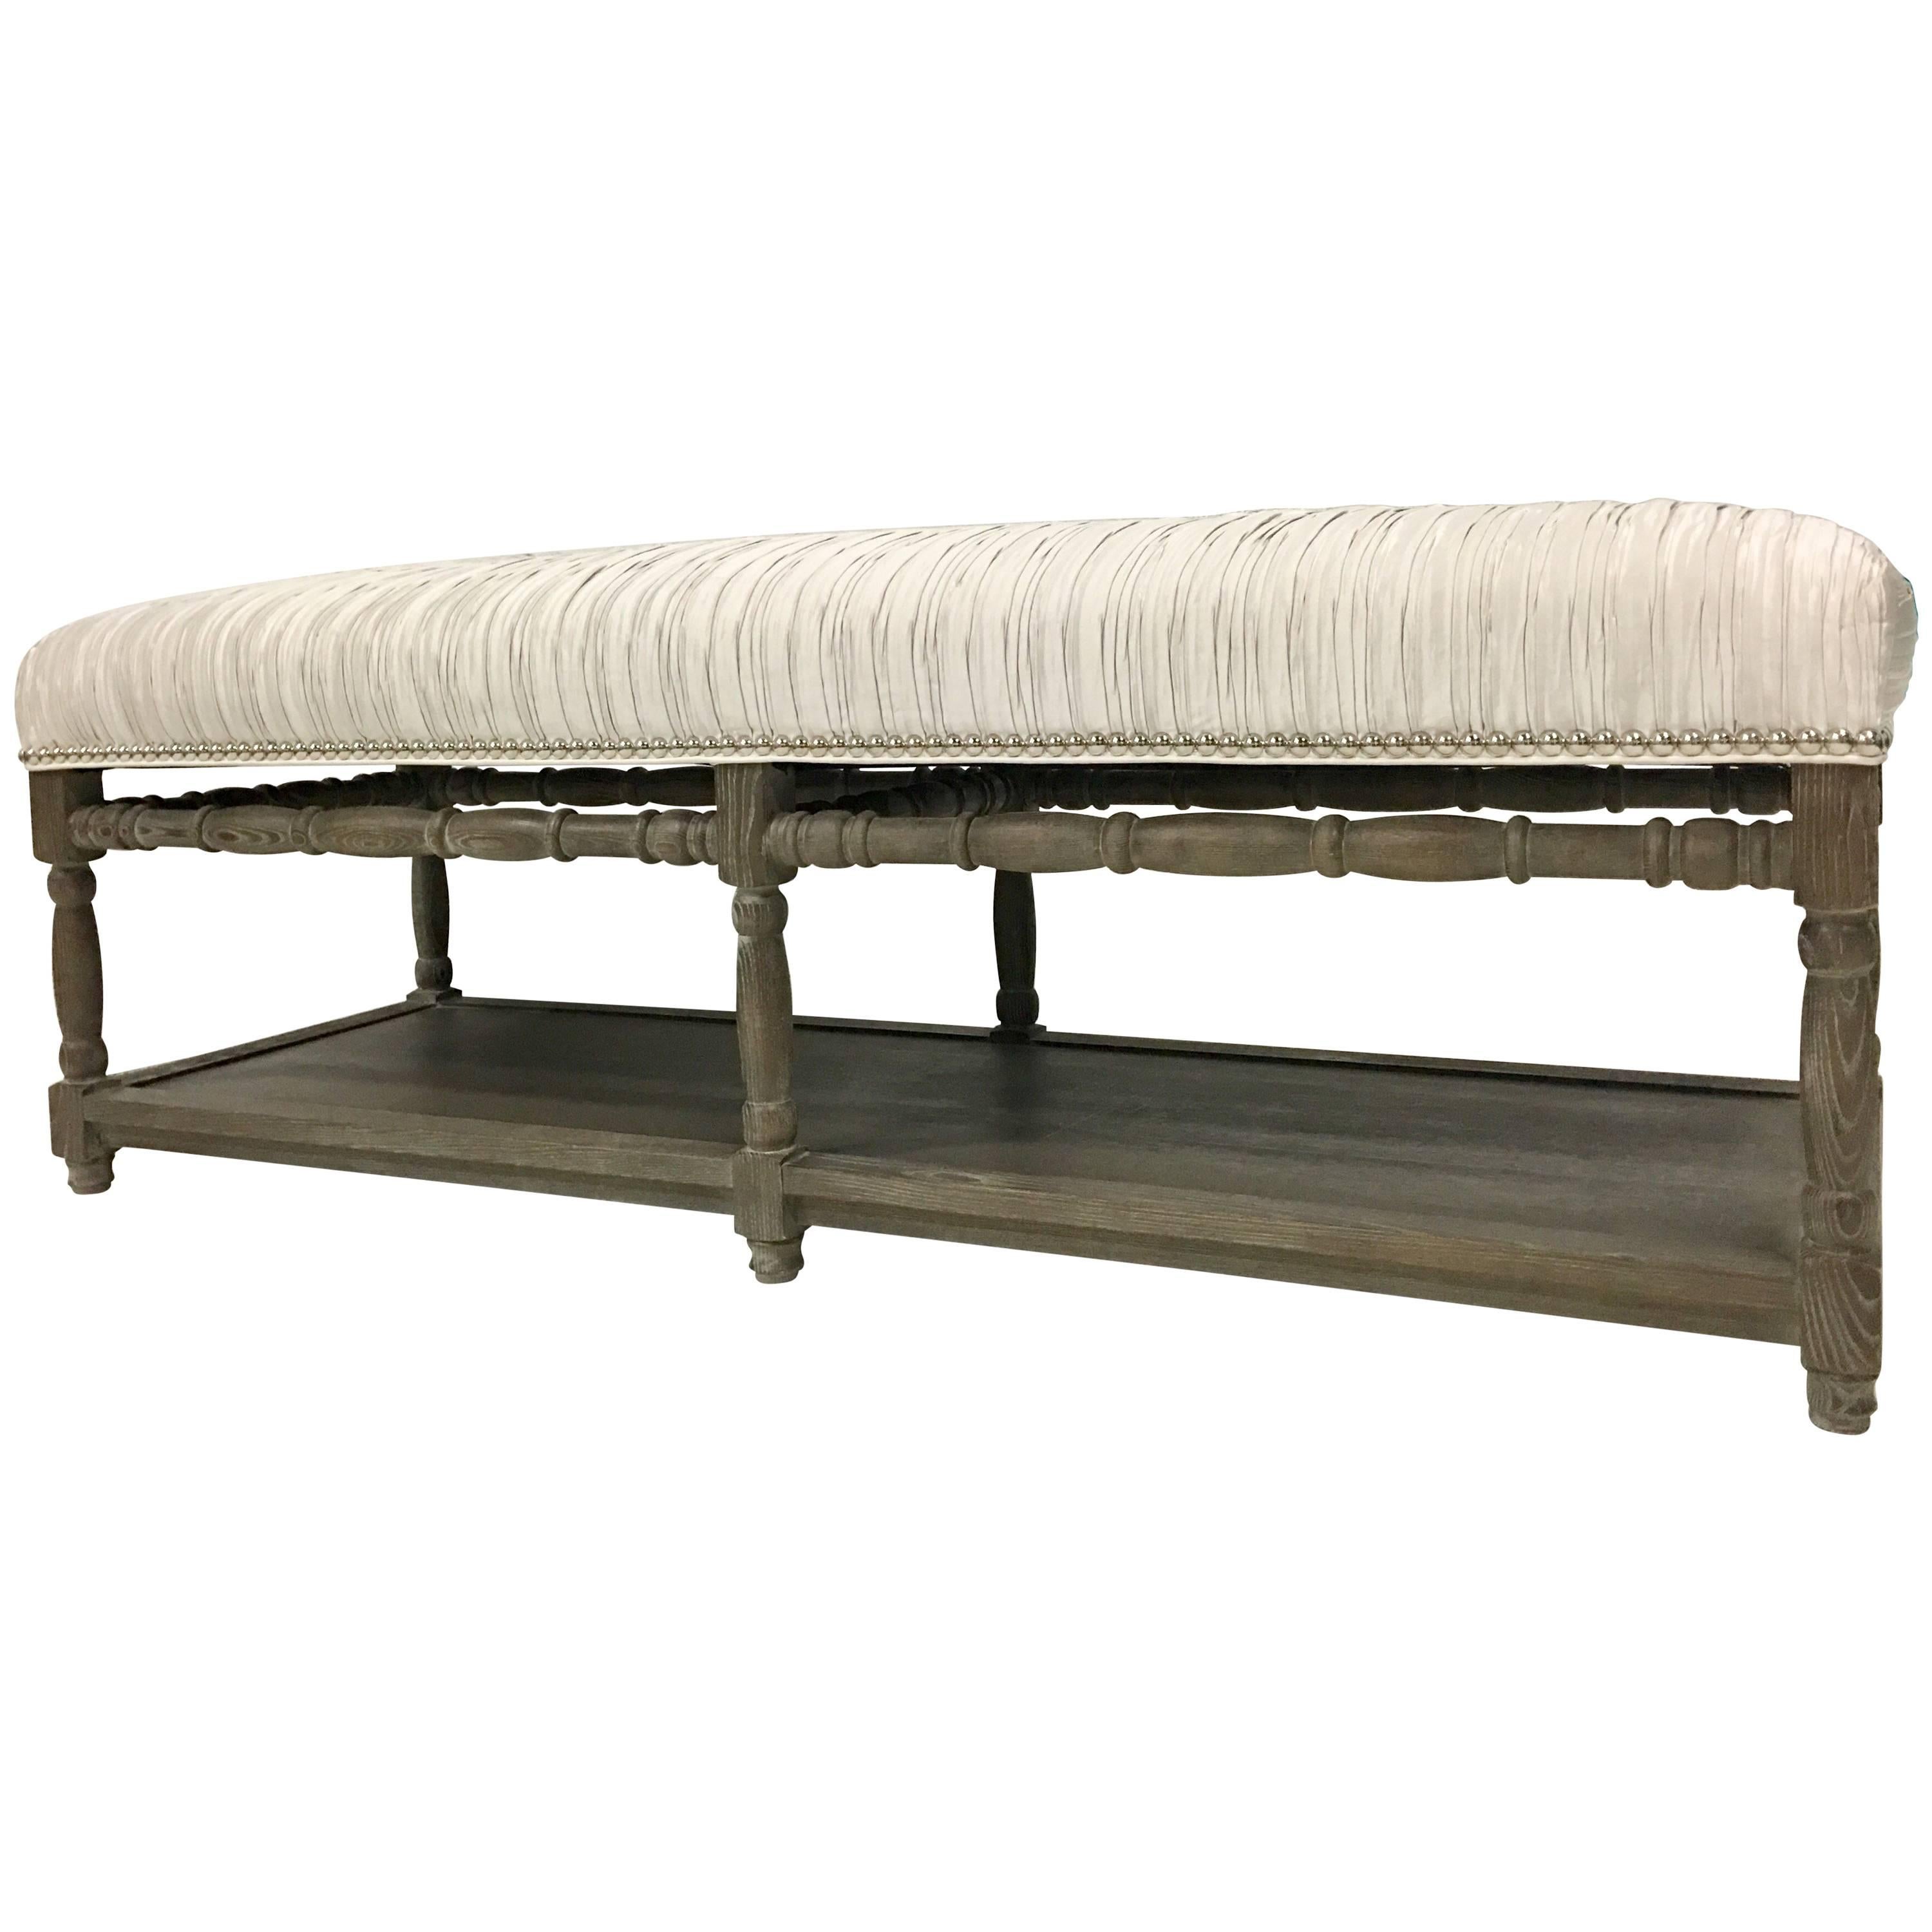 21st Century Contemporary Drift Wood & Silver Metallic Upholstered Wood Bench For Sale